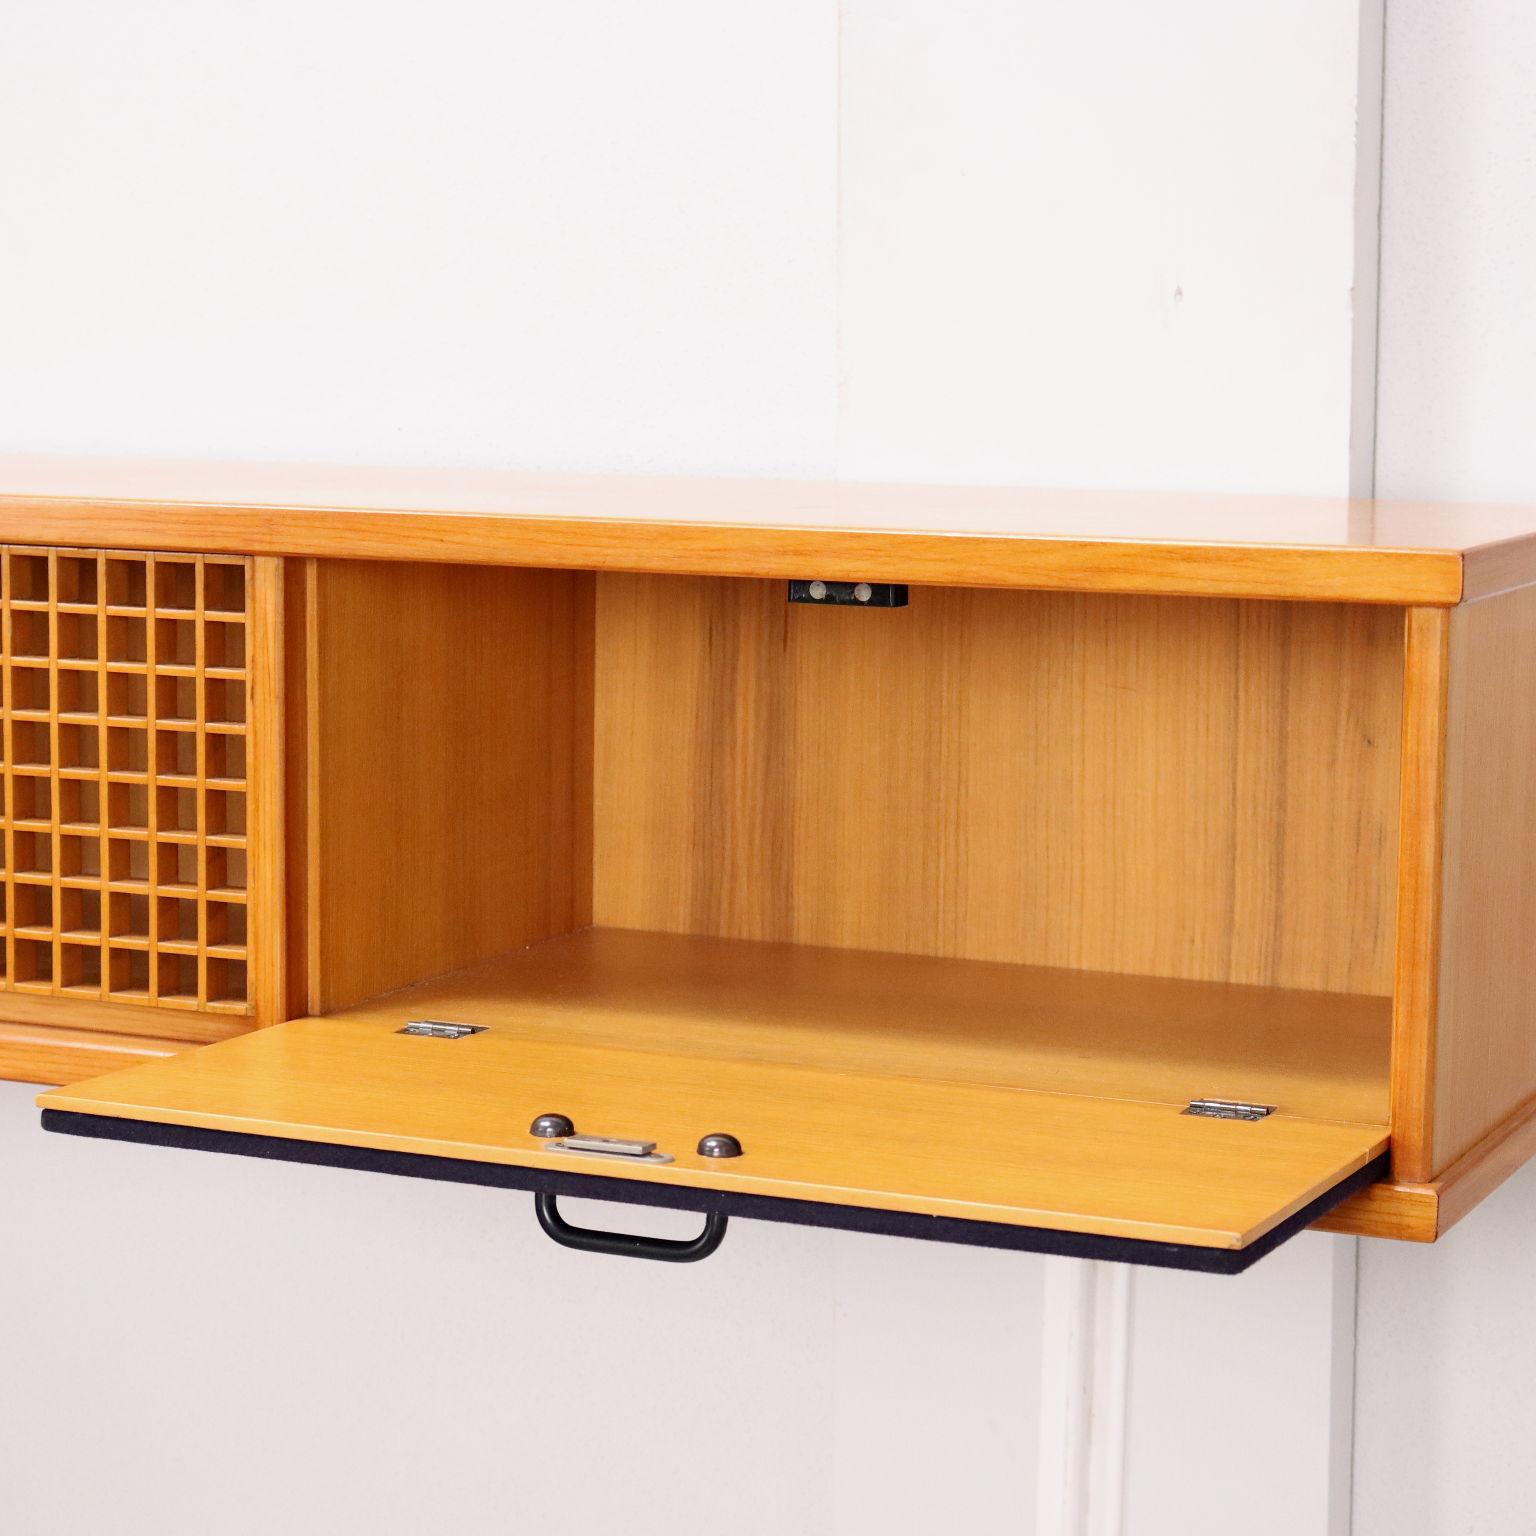 Cabinet in the style of Gianfranco Frattini for Cantieri Carugati, with flap opening compartments with fabric-covered fronts, removable lattice grids, sliding shutter for drawer compartment, blond mahogany veneer, insert on the top in formica.